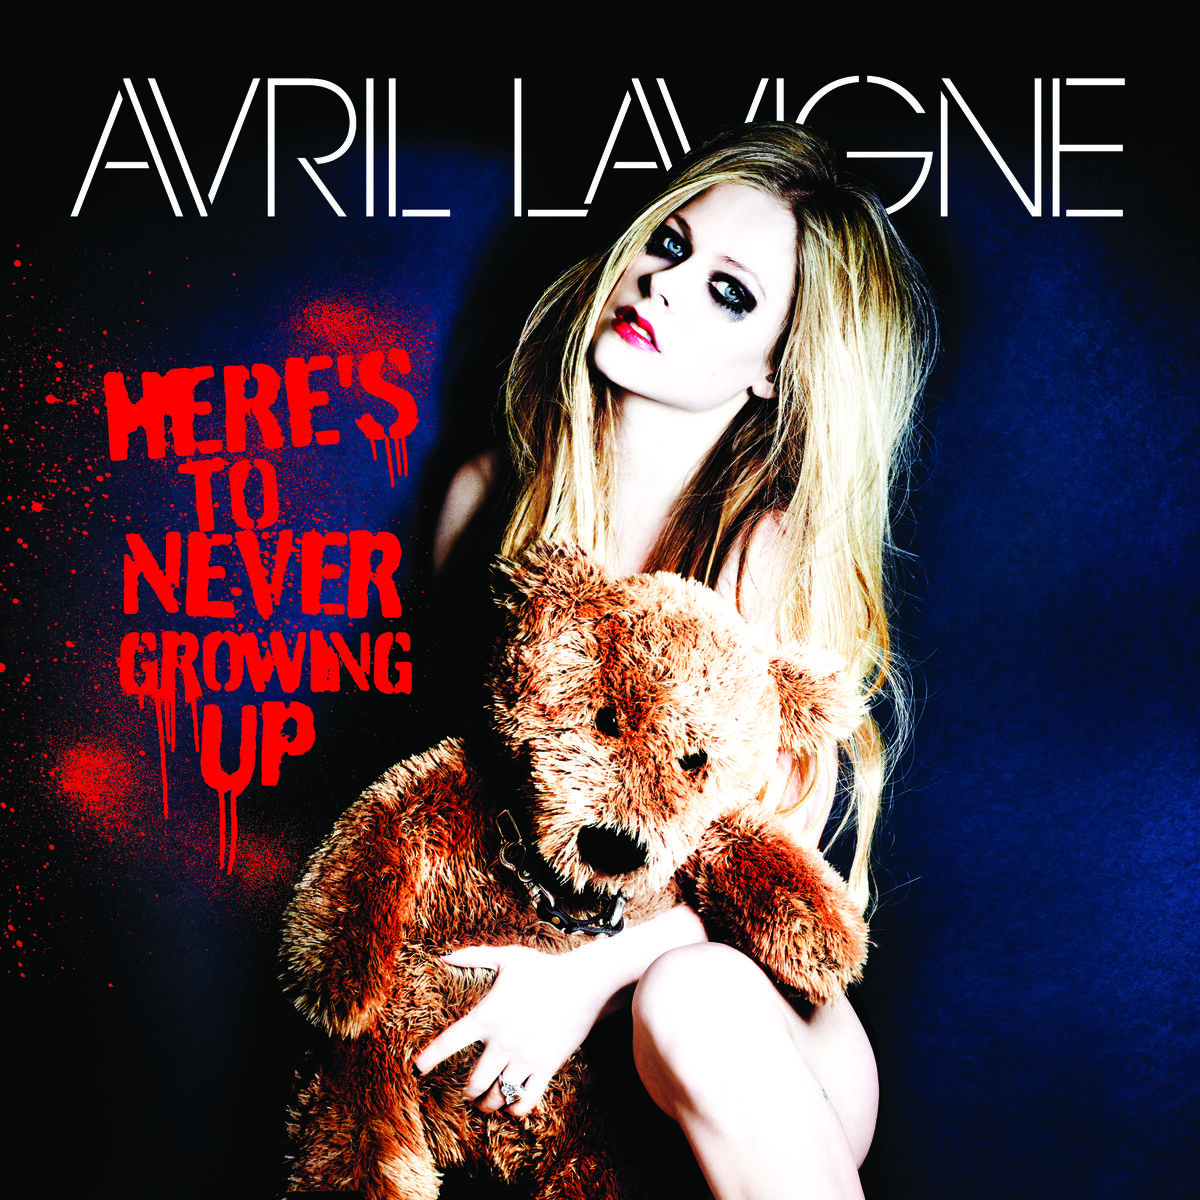 Avril Lavigne to Premiere New Music Video During Mean Girls 2 - J-14